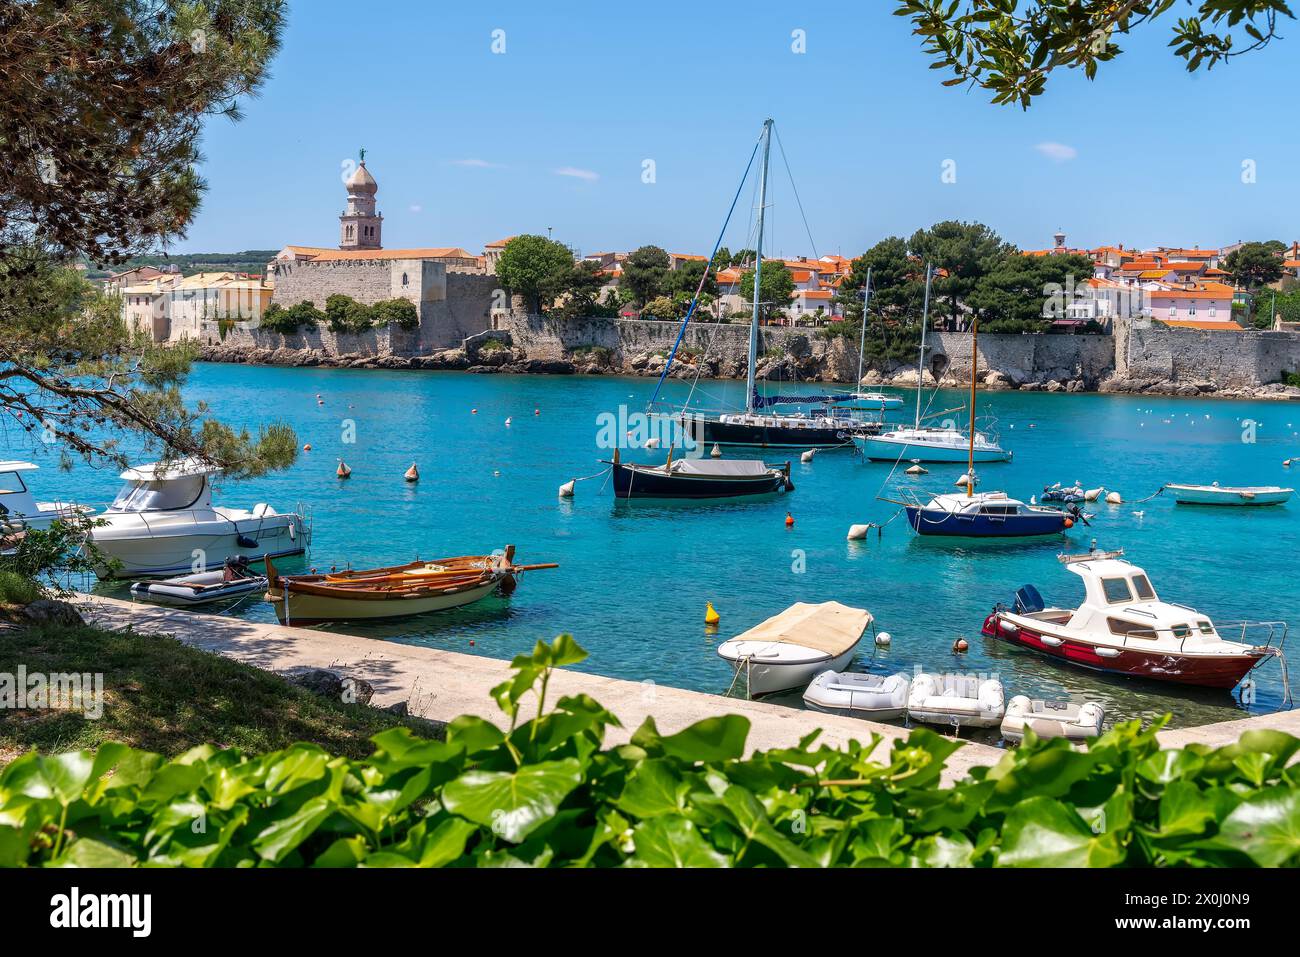 Panorama from the Adriatic promenade of the town of Krk on the island of Krk, Croatia Stock Photo